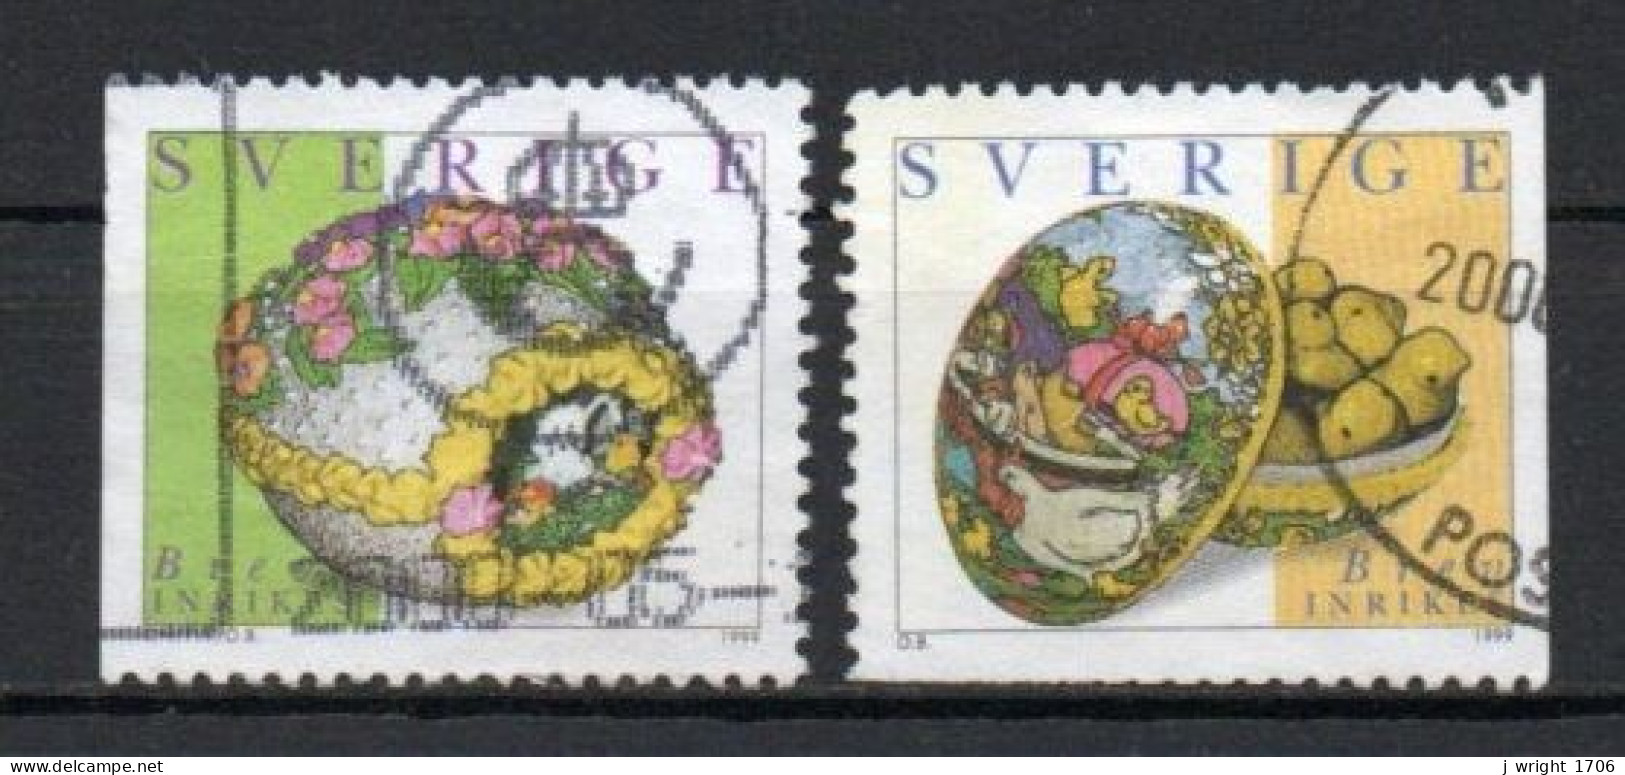 Sweden, 1999, Easter Stamps, Set, USED - Used Stamps